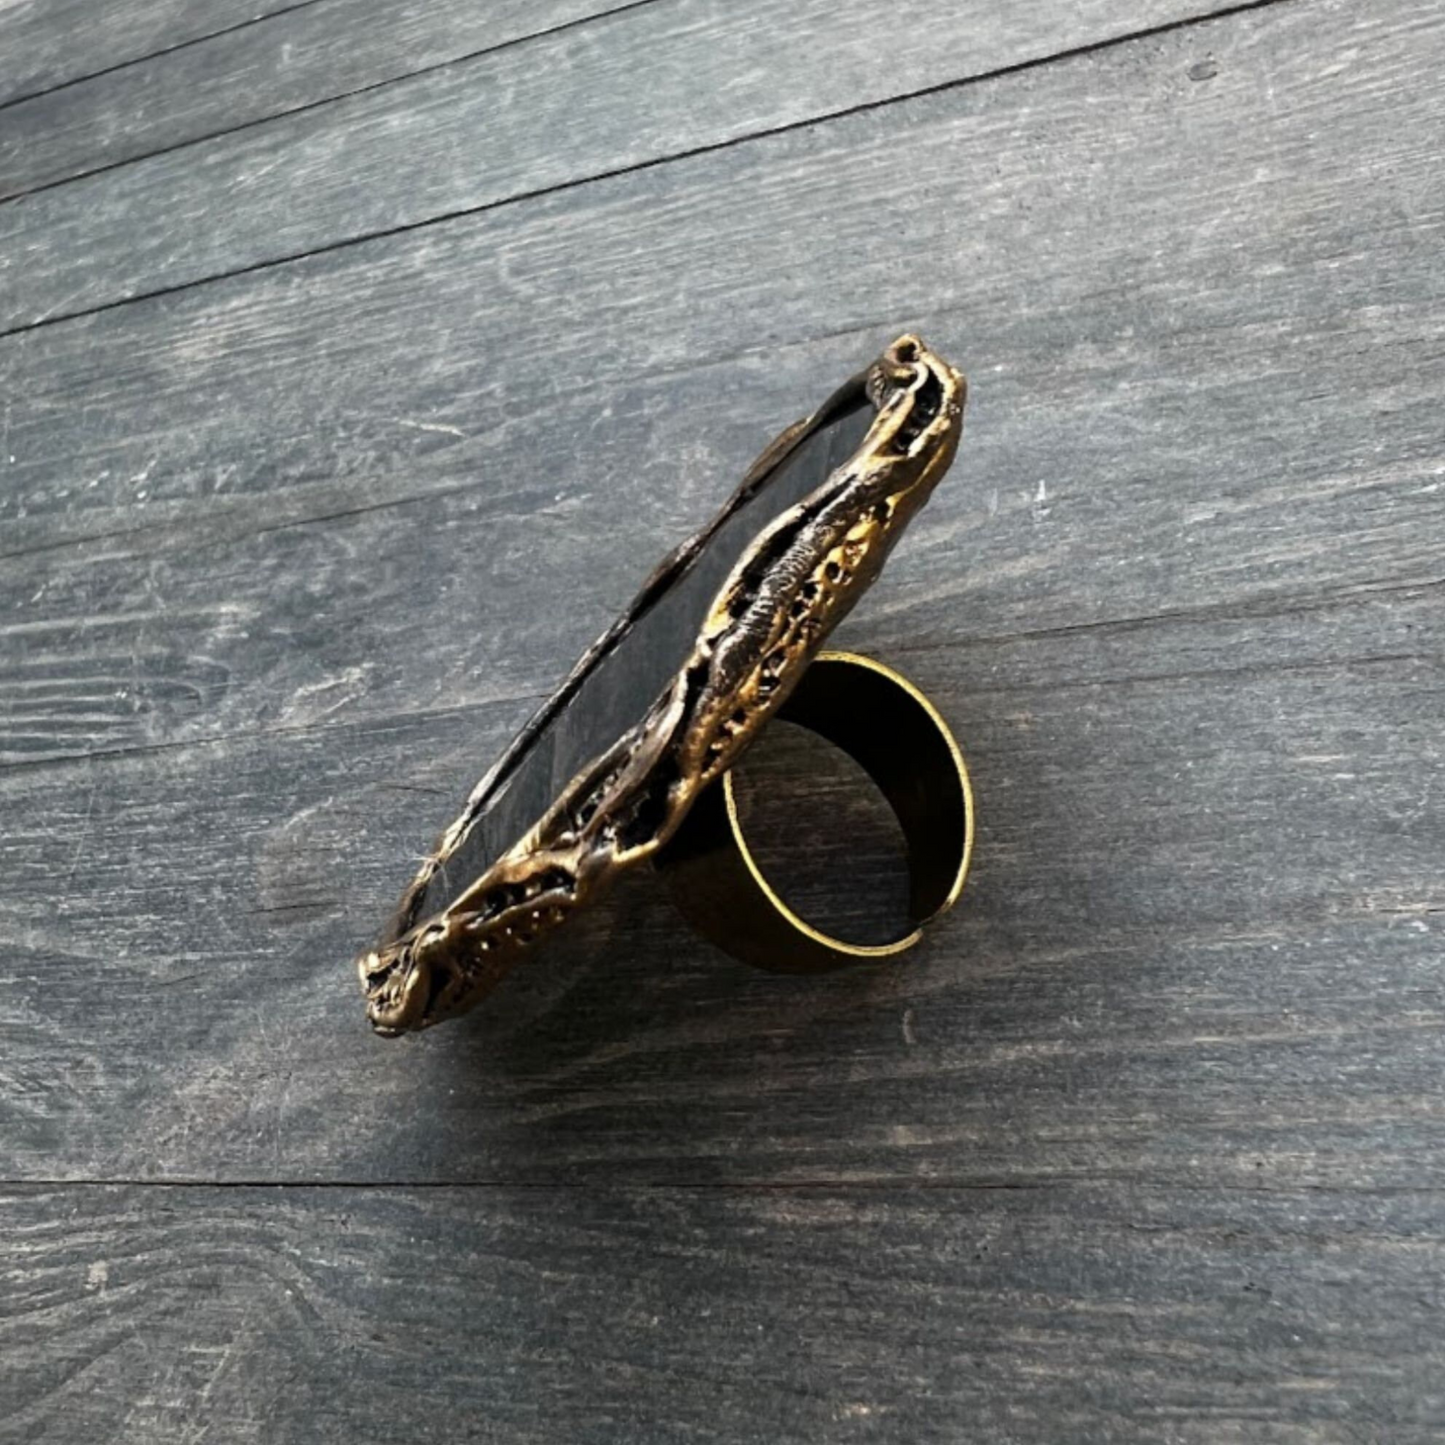 Chunky Black Obsidian Large Stone Ring, A Big Oversized Cocktail Ring for Bold Elegance